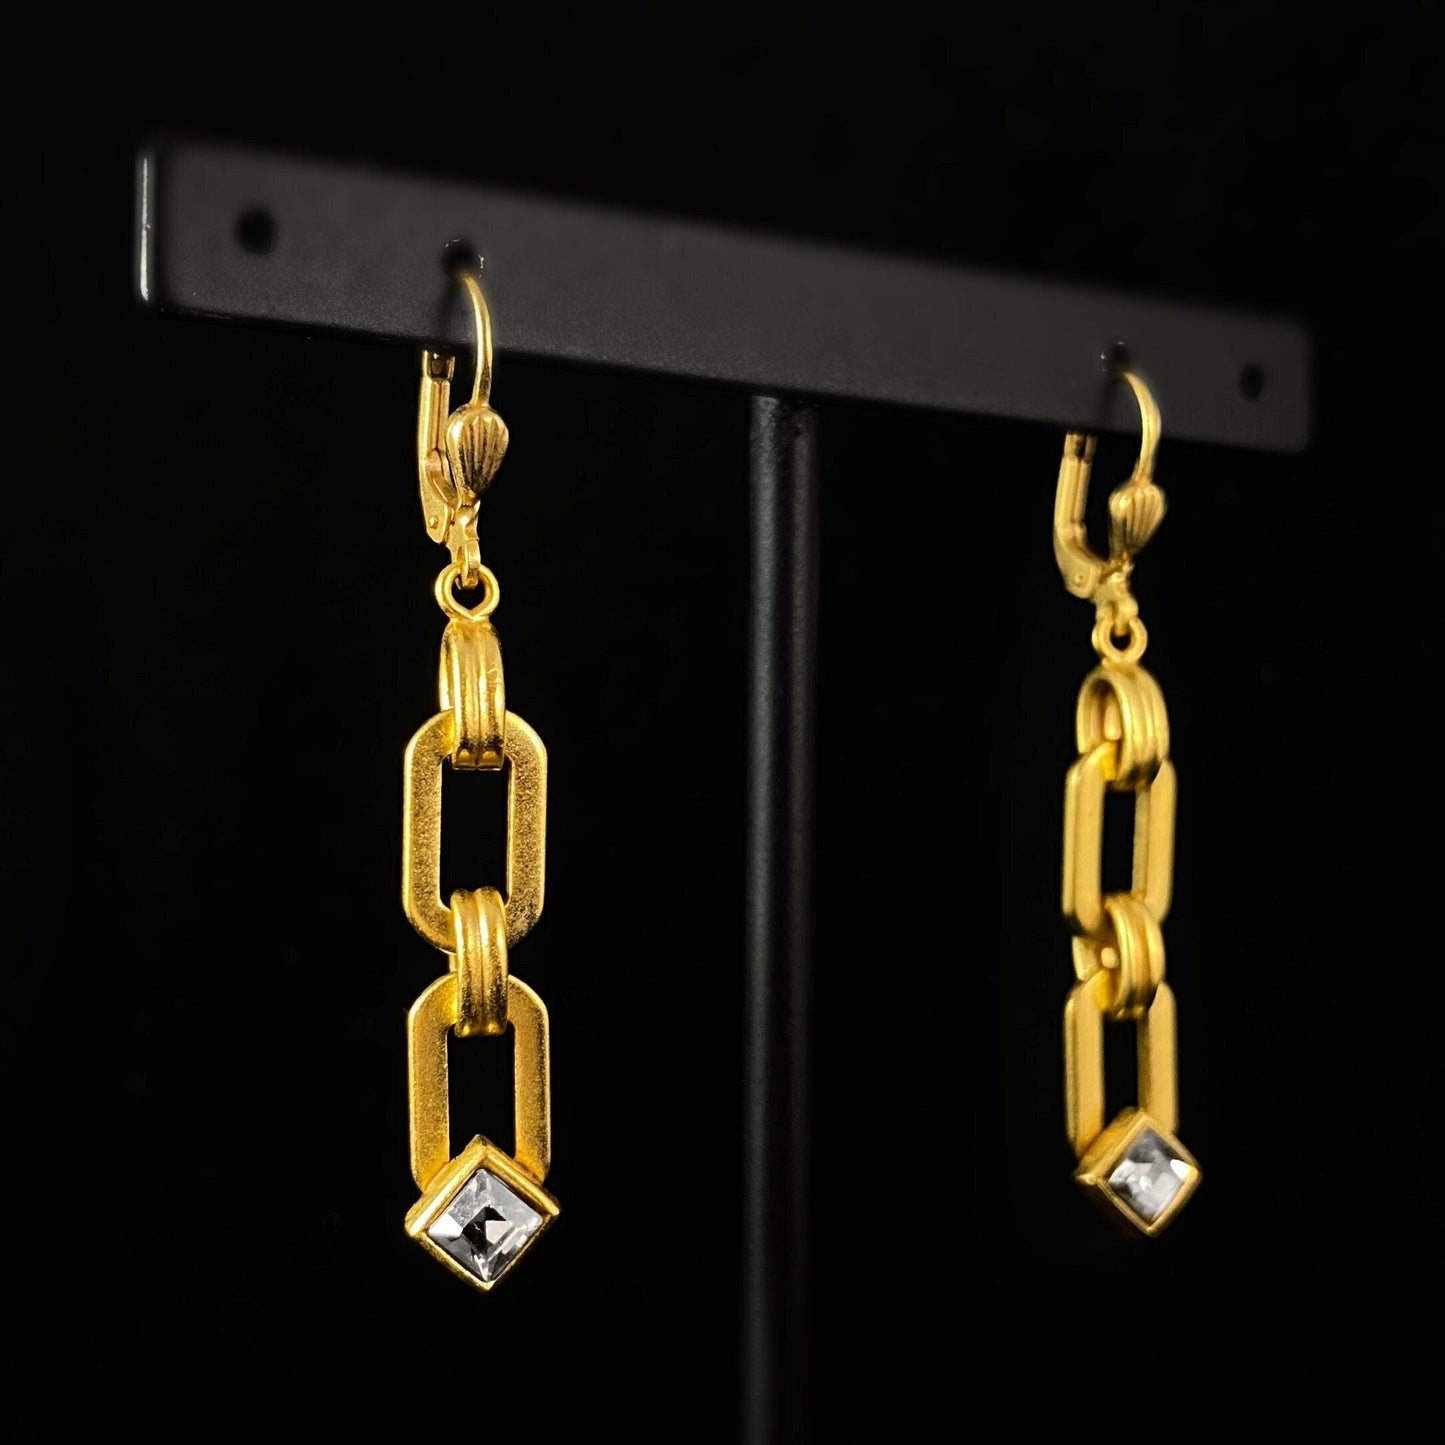 Gold Chain Link and Clear Swarovski Crystal Drop Earrings - La Vie Parisienne by Catherine Popesco